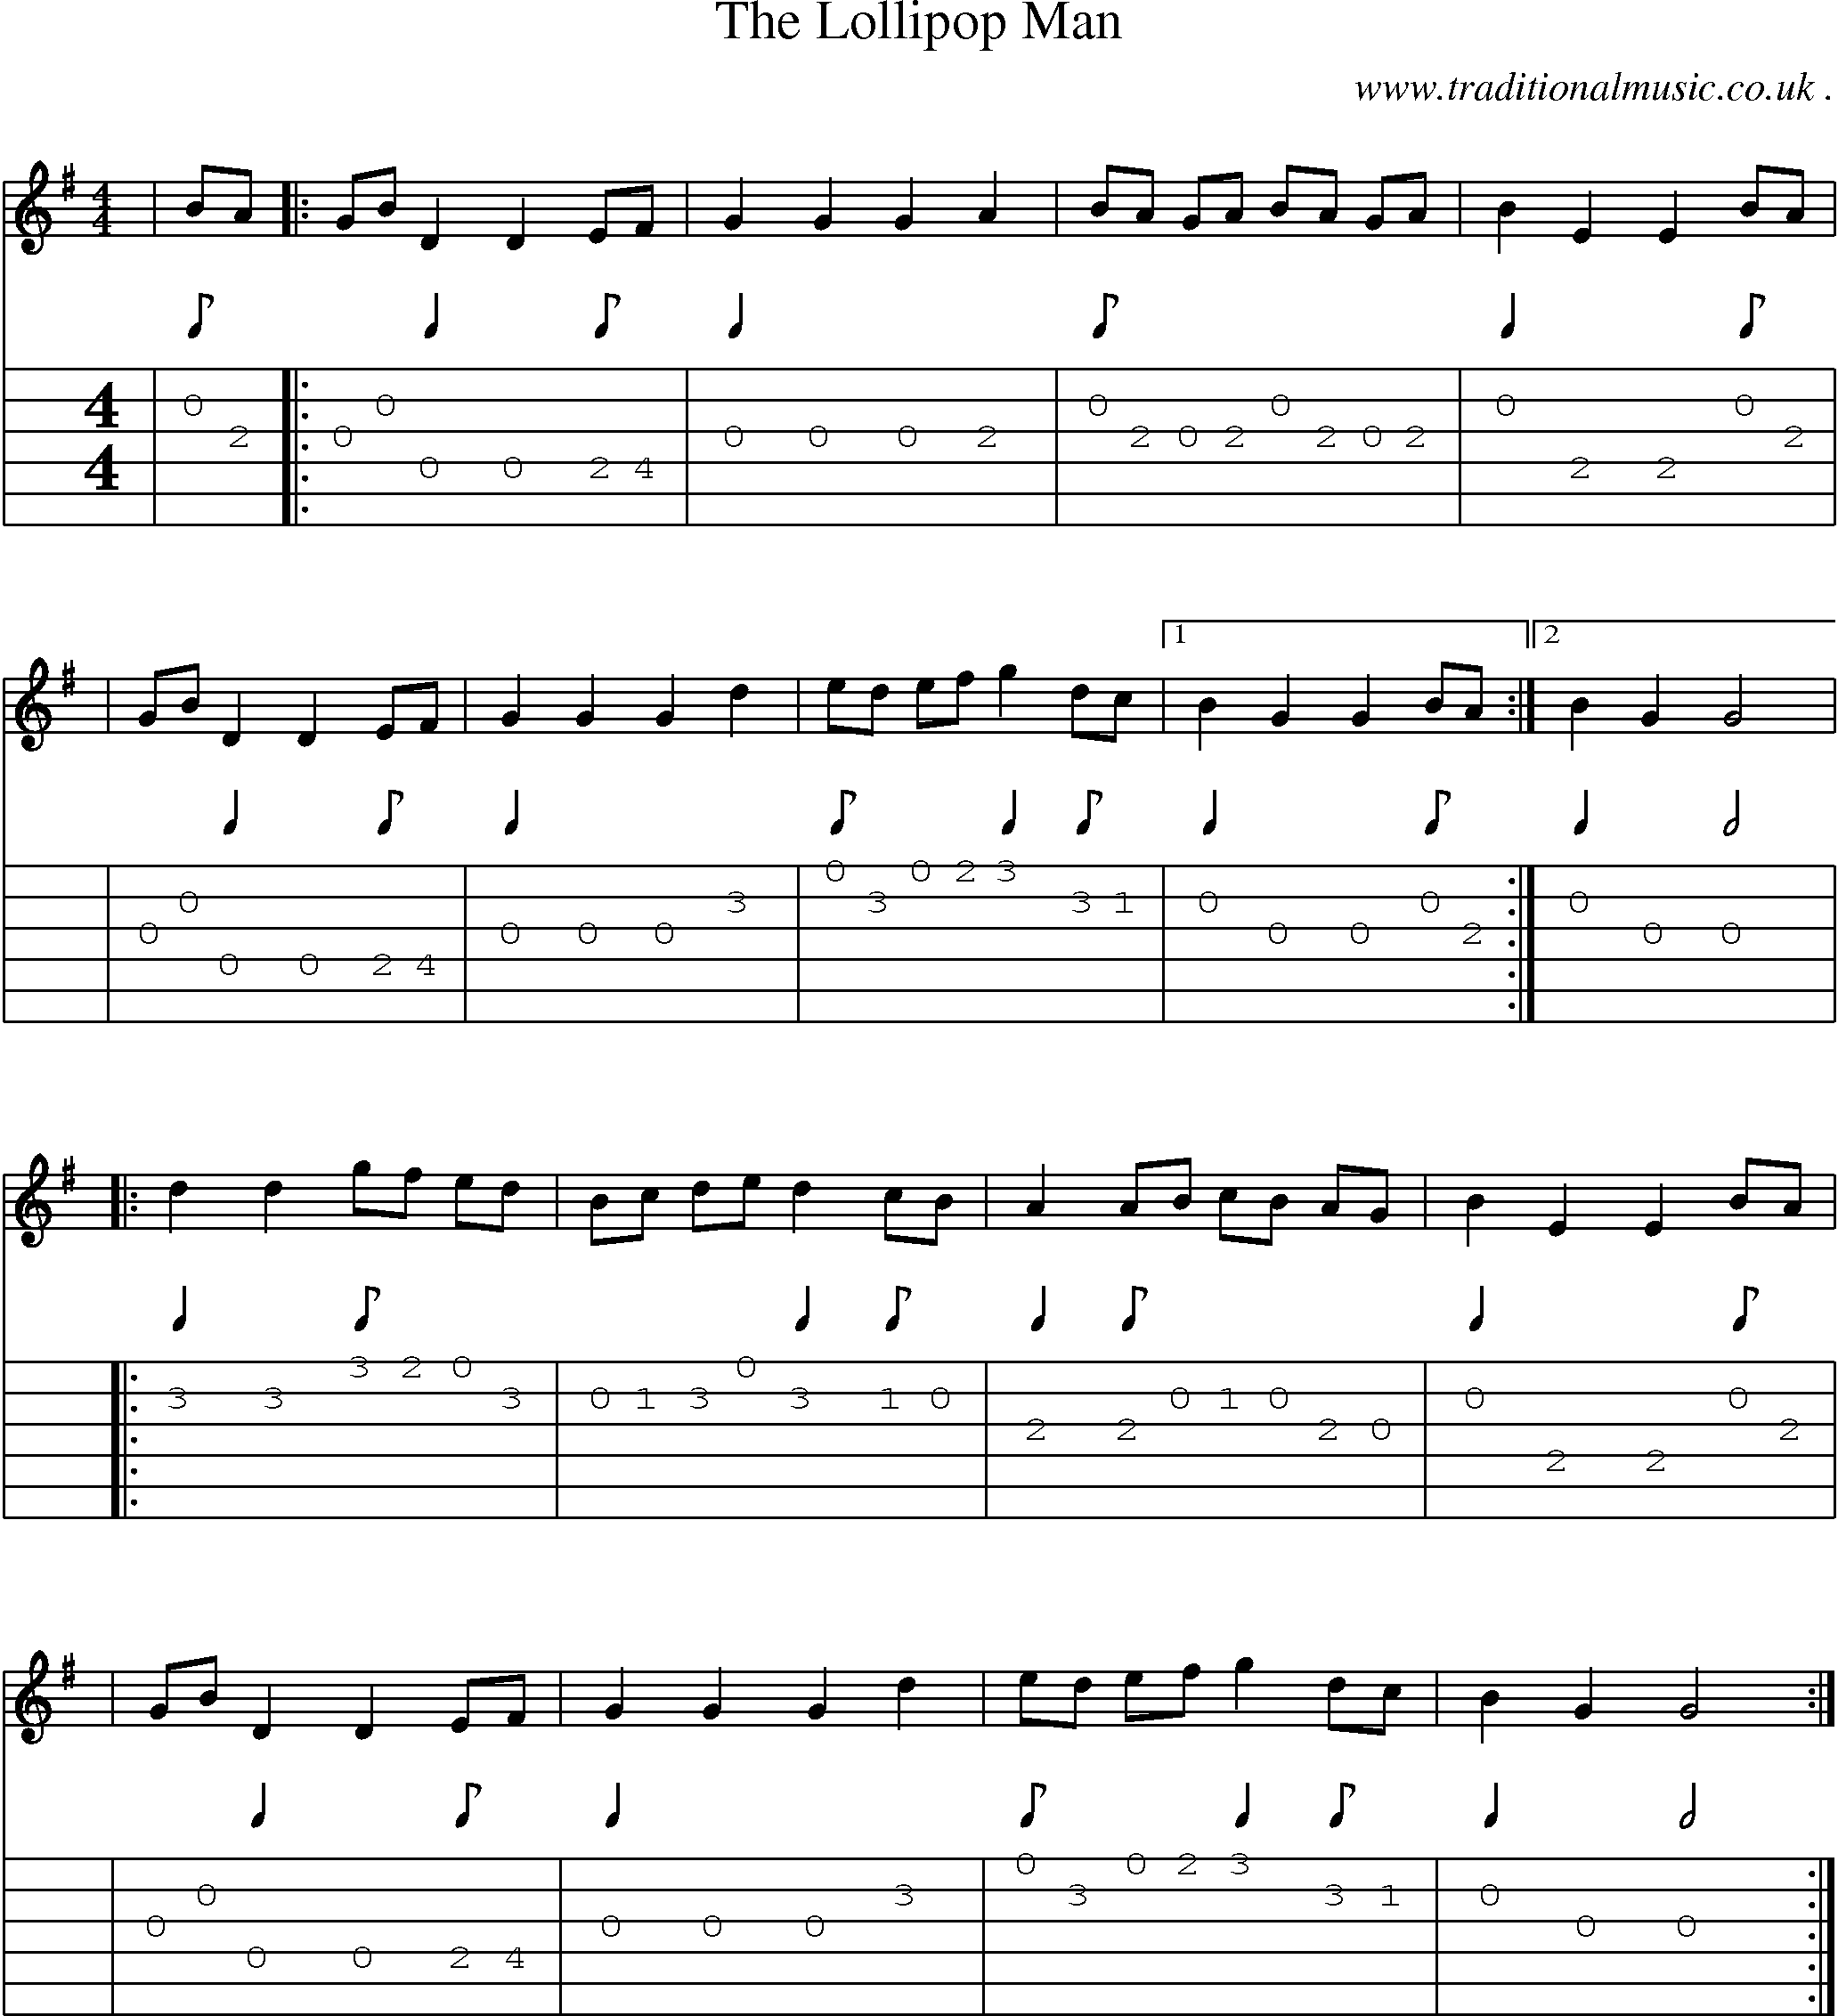 Sheet-Music and Guitar Tabs for The Lollipop Man